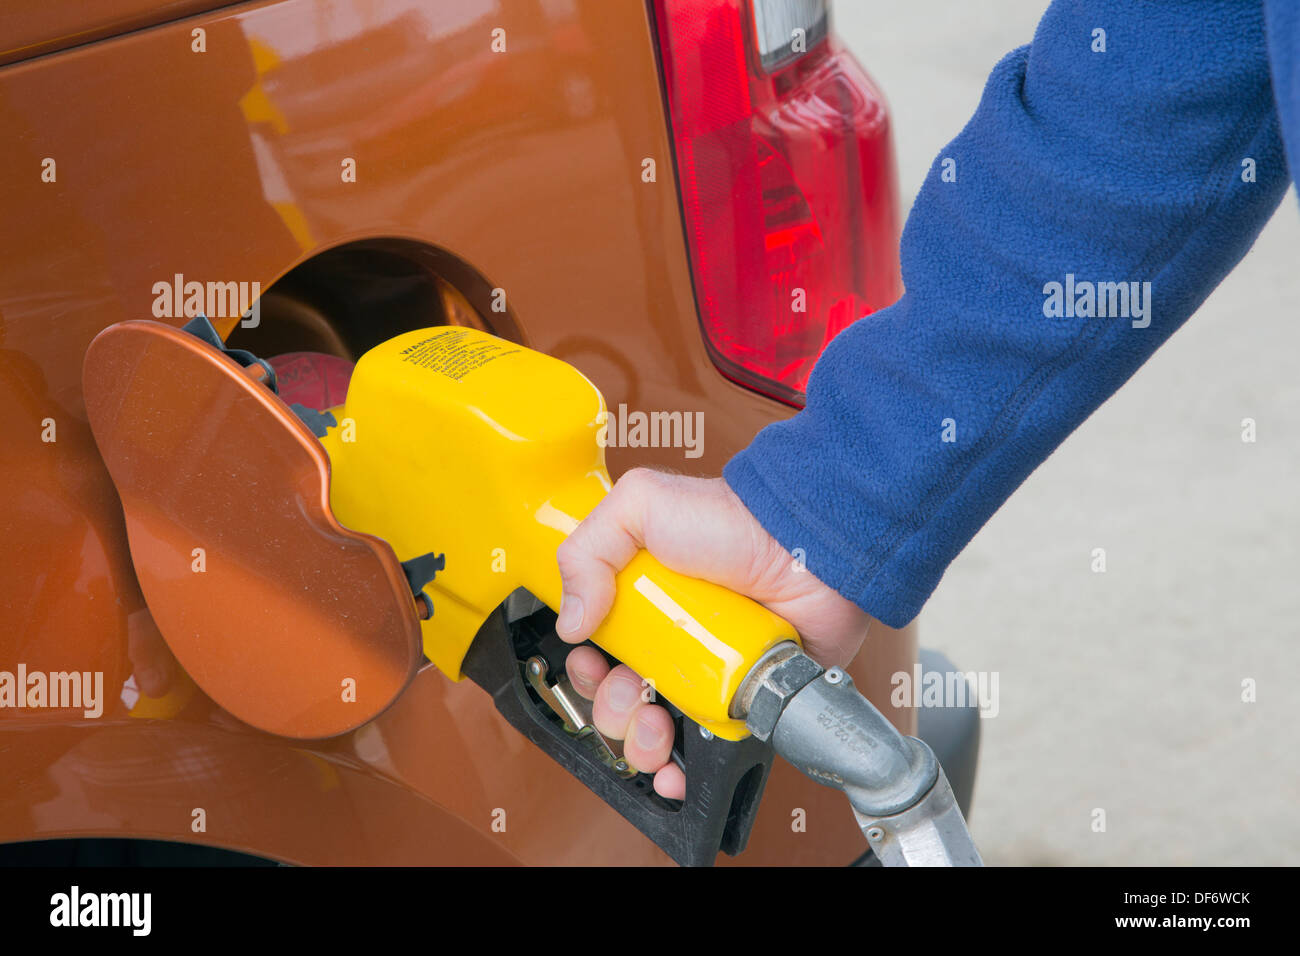 Man pumping gas into his vehicle at service station Stock Photo